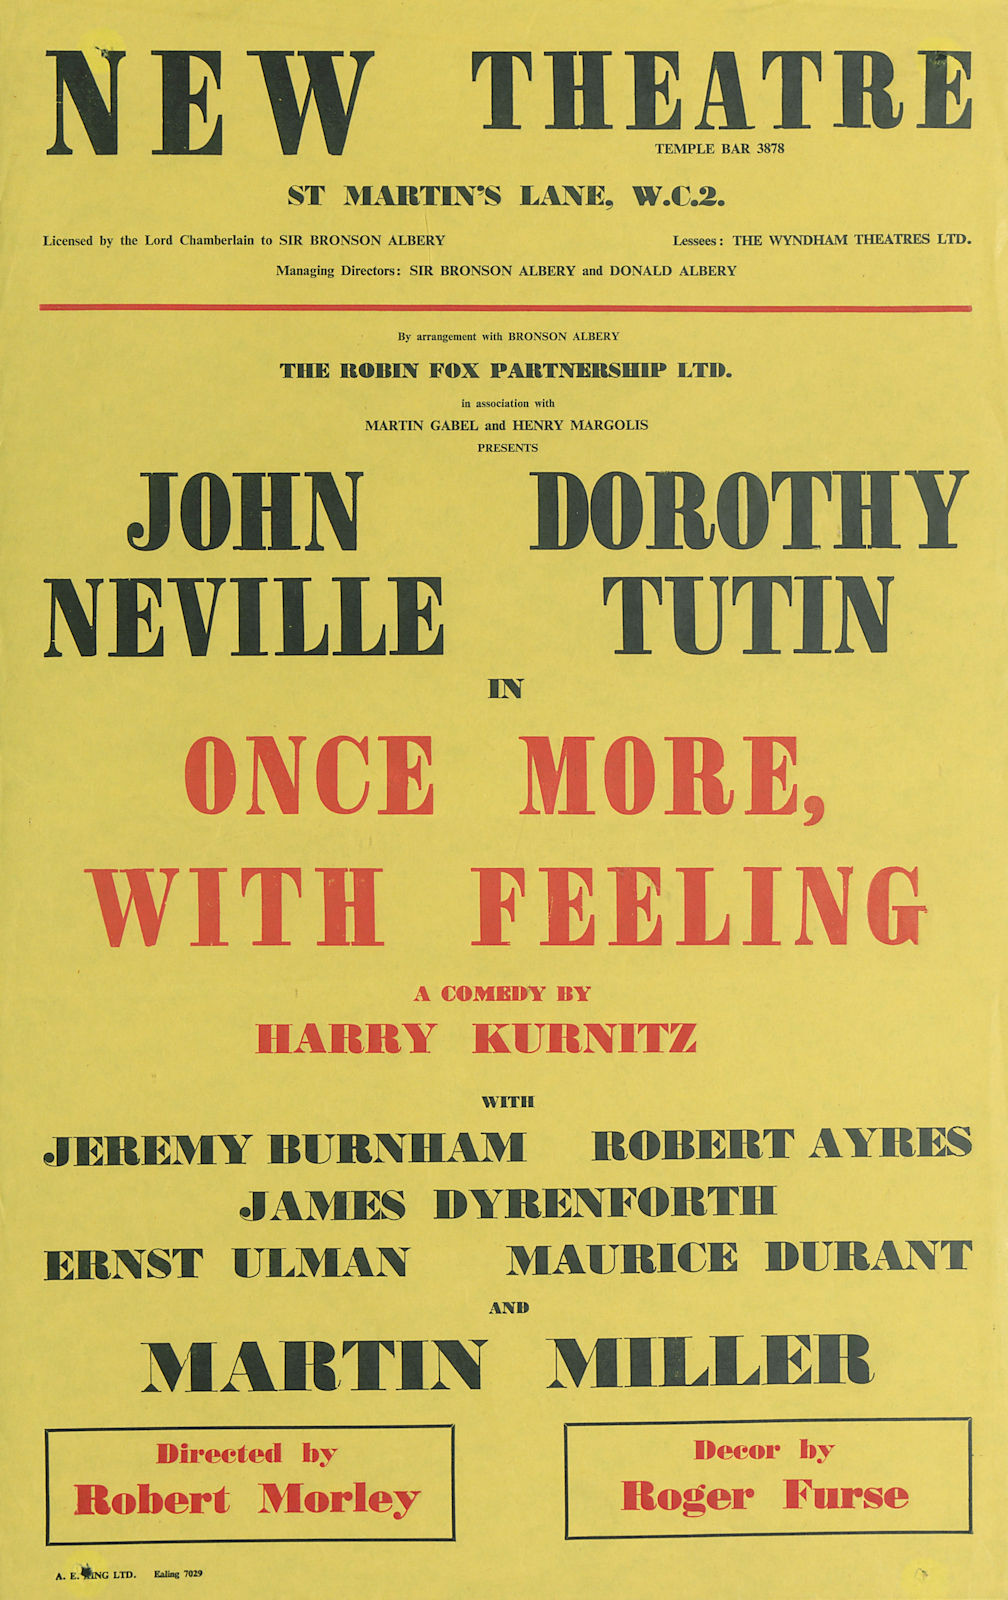 Associate Product New Theatre. Once More With Feeling. Harry Kurnitz. Neville Tutin Morley 1959